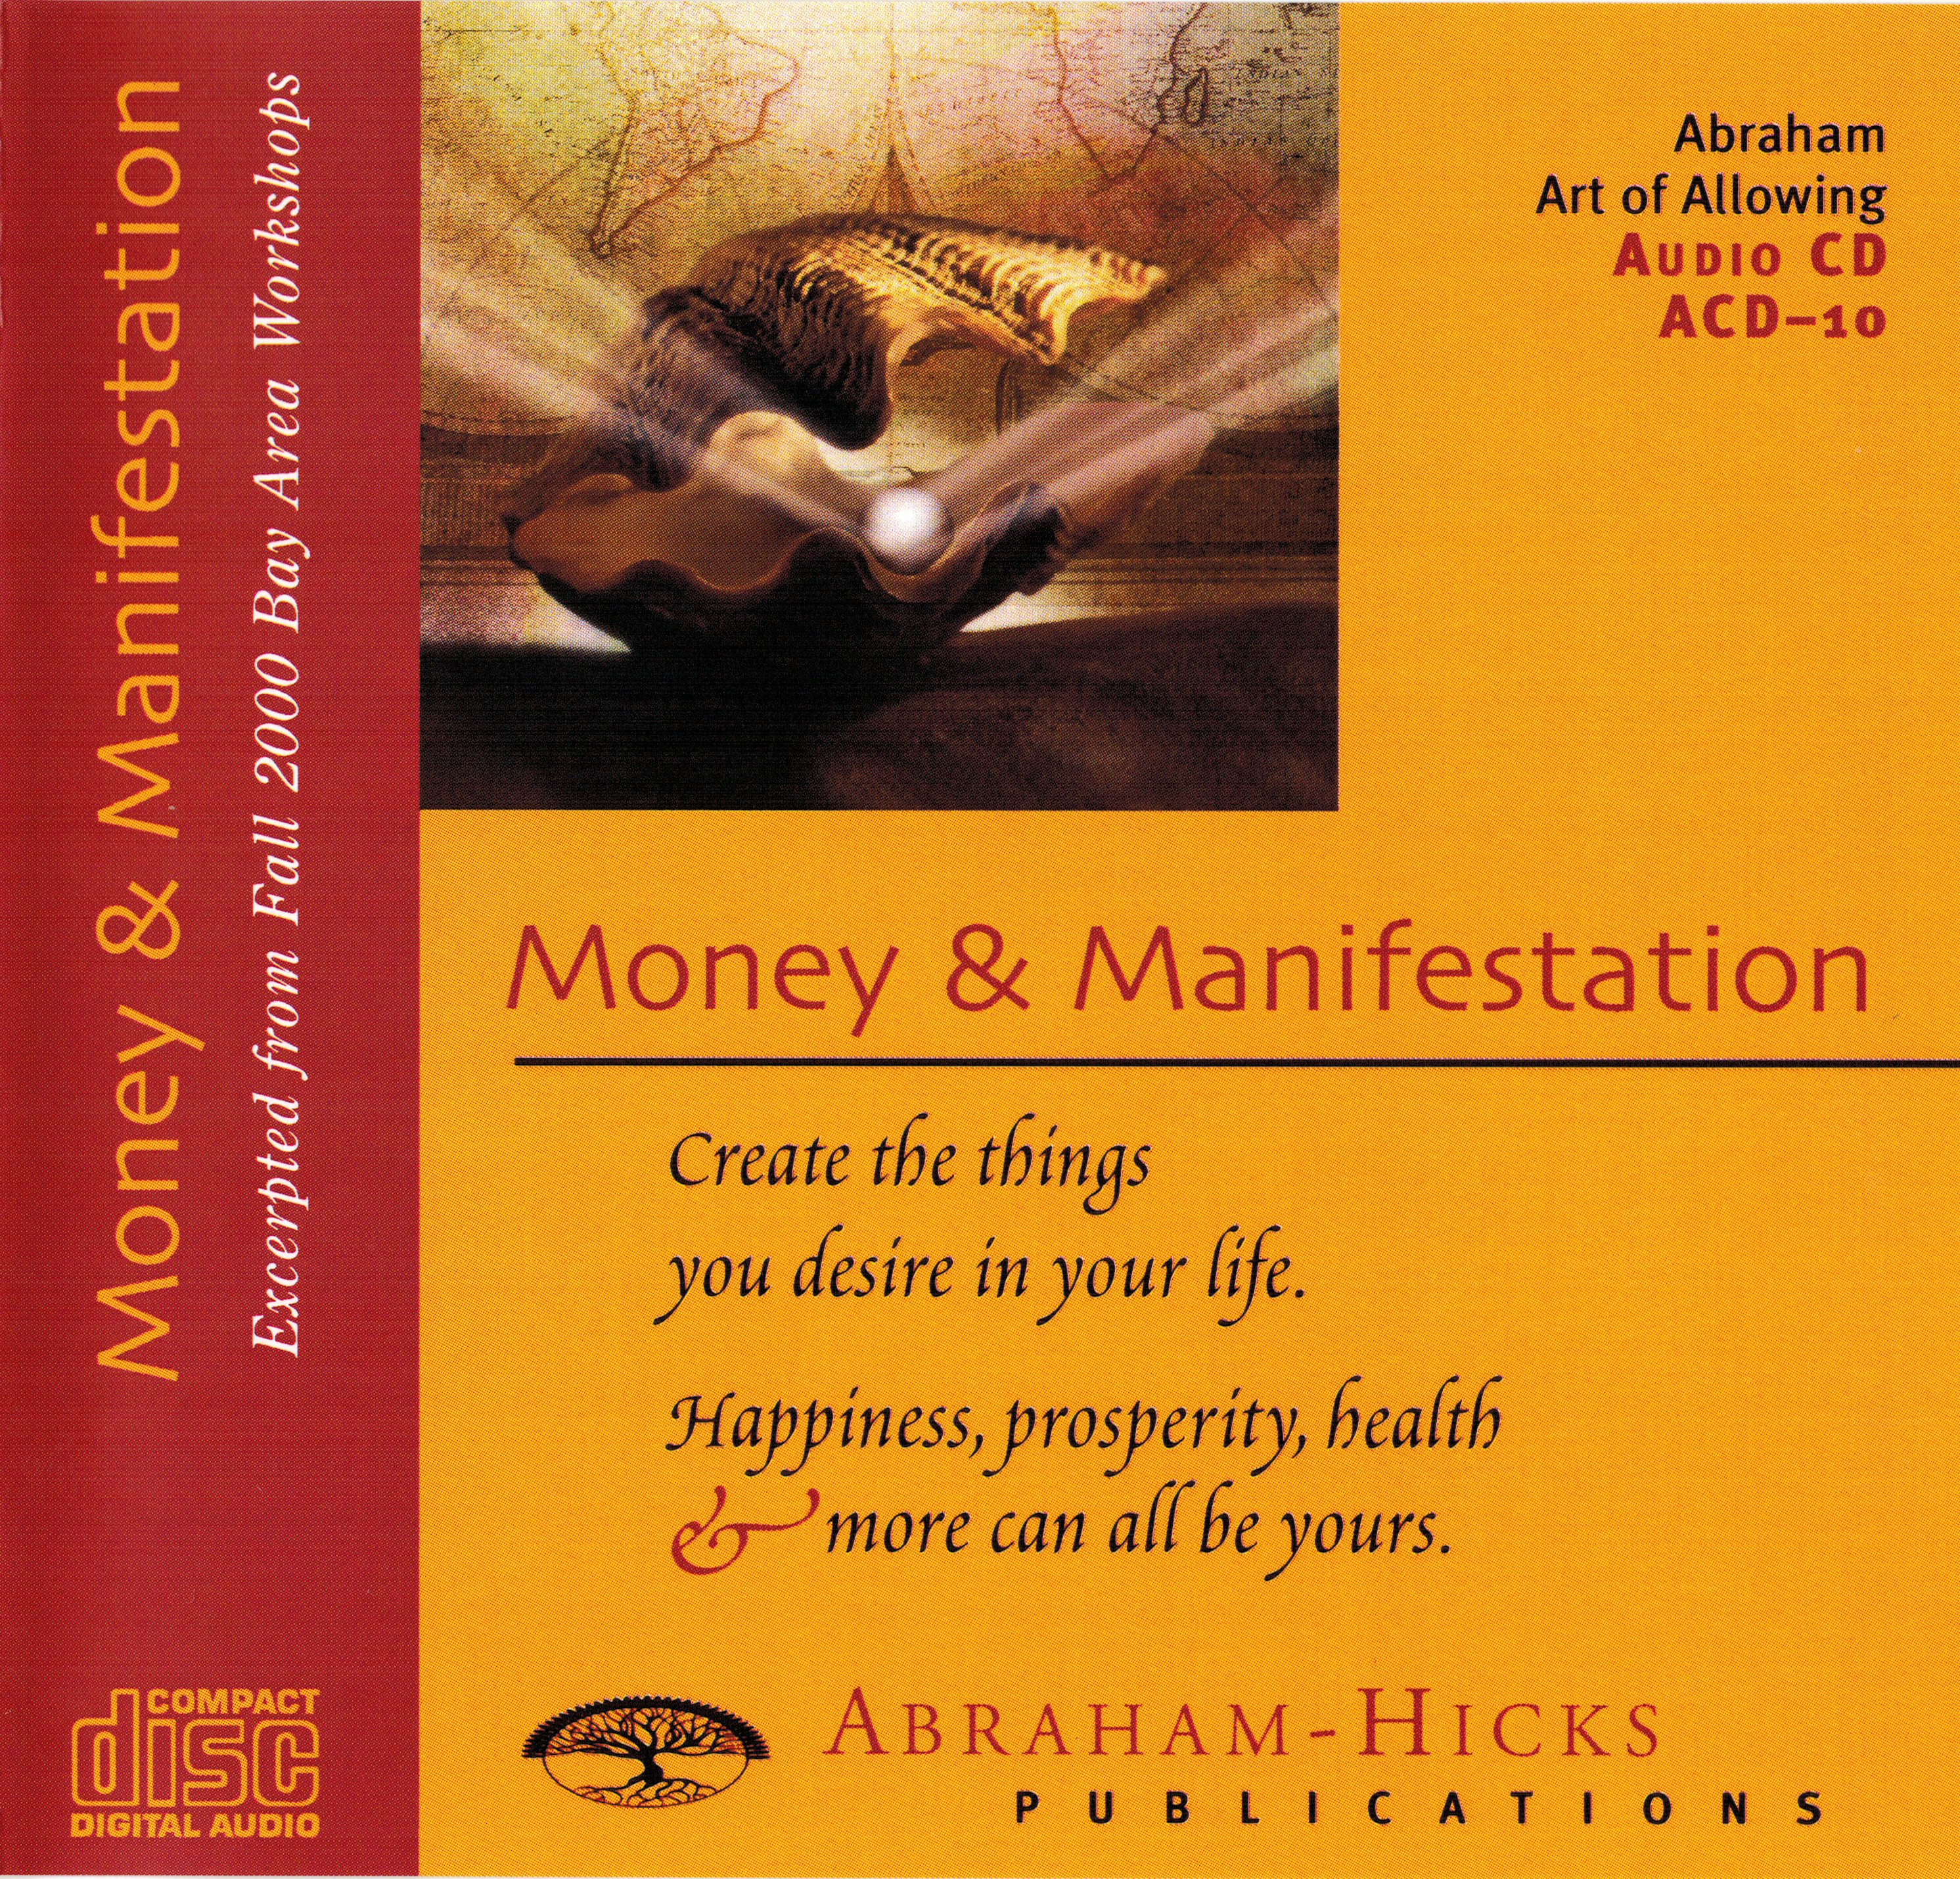 Special Subjects MP3: Money & Manifestation